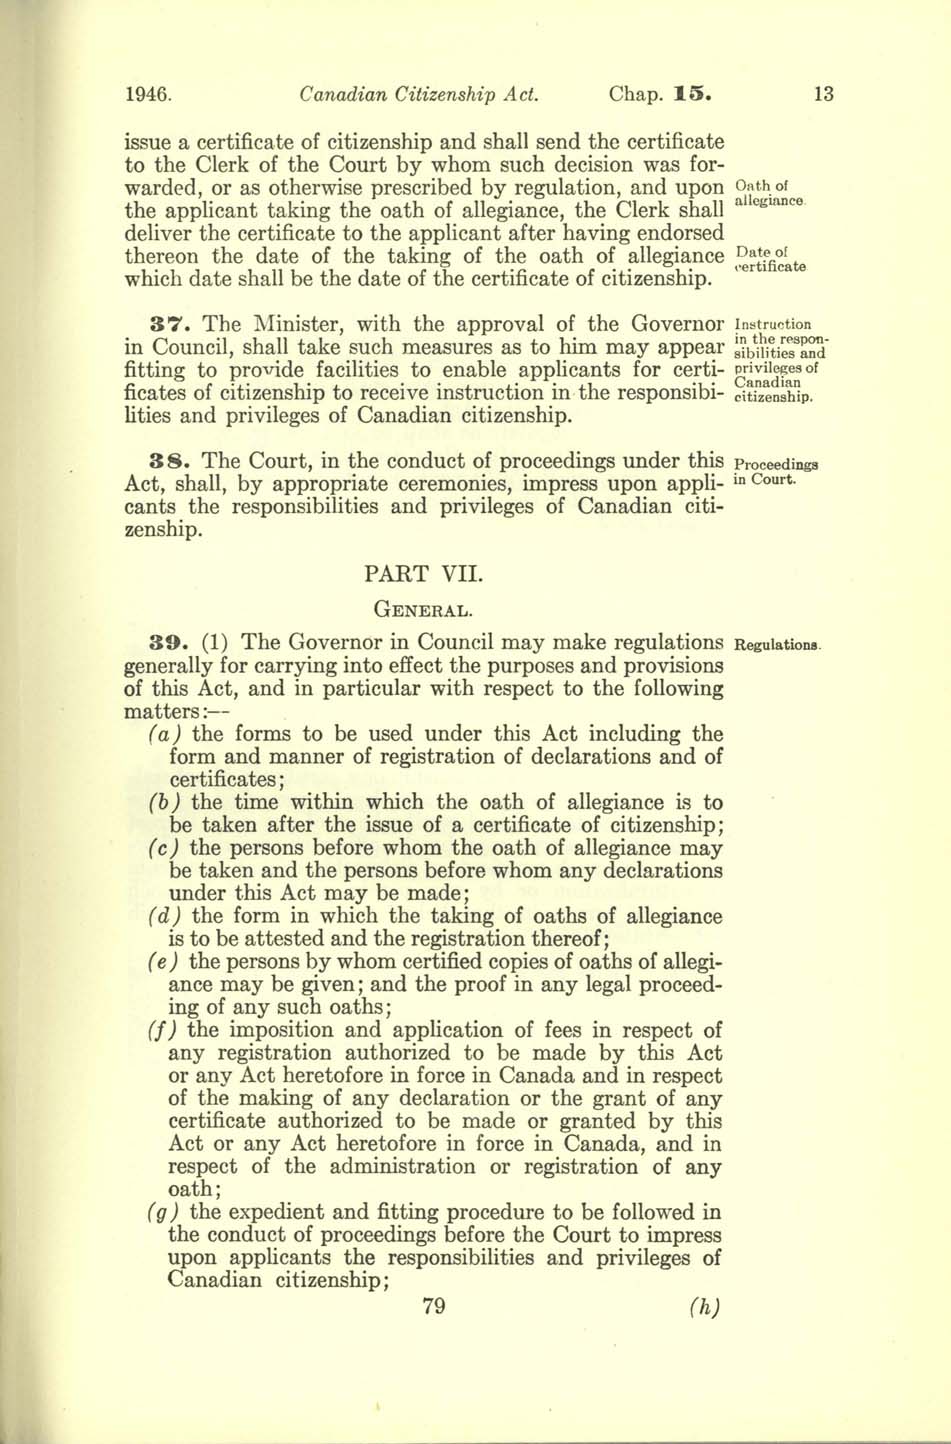 Chap 15 Page 79 Canadian Citizenship Act, 1947